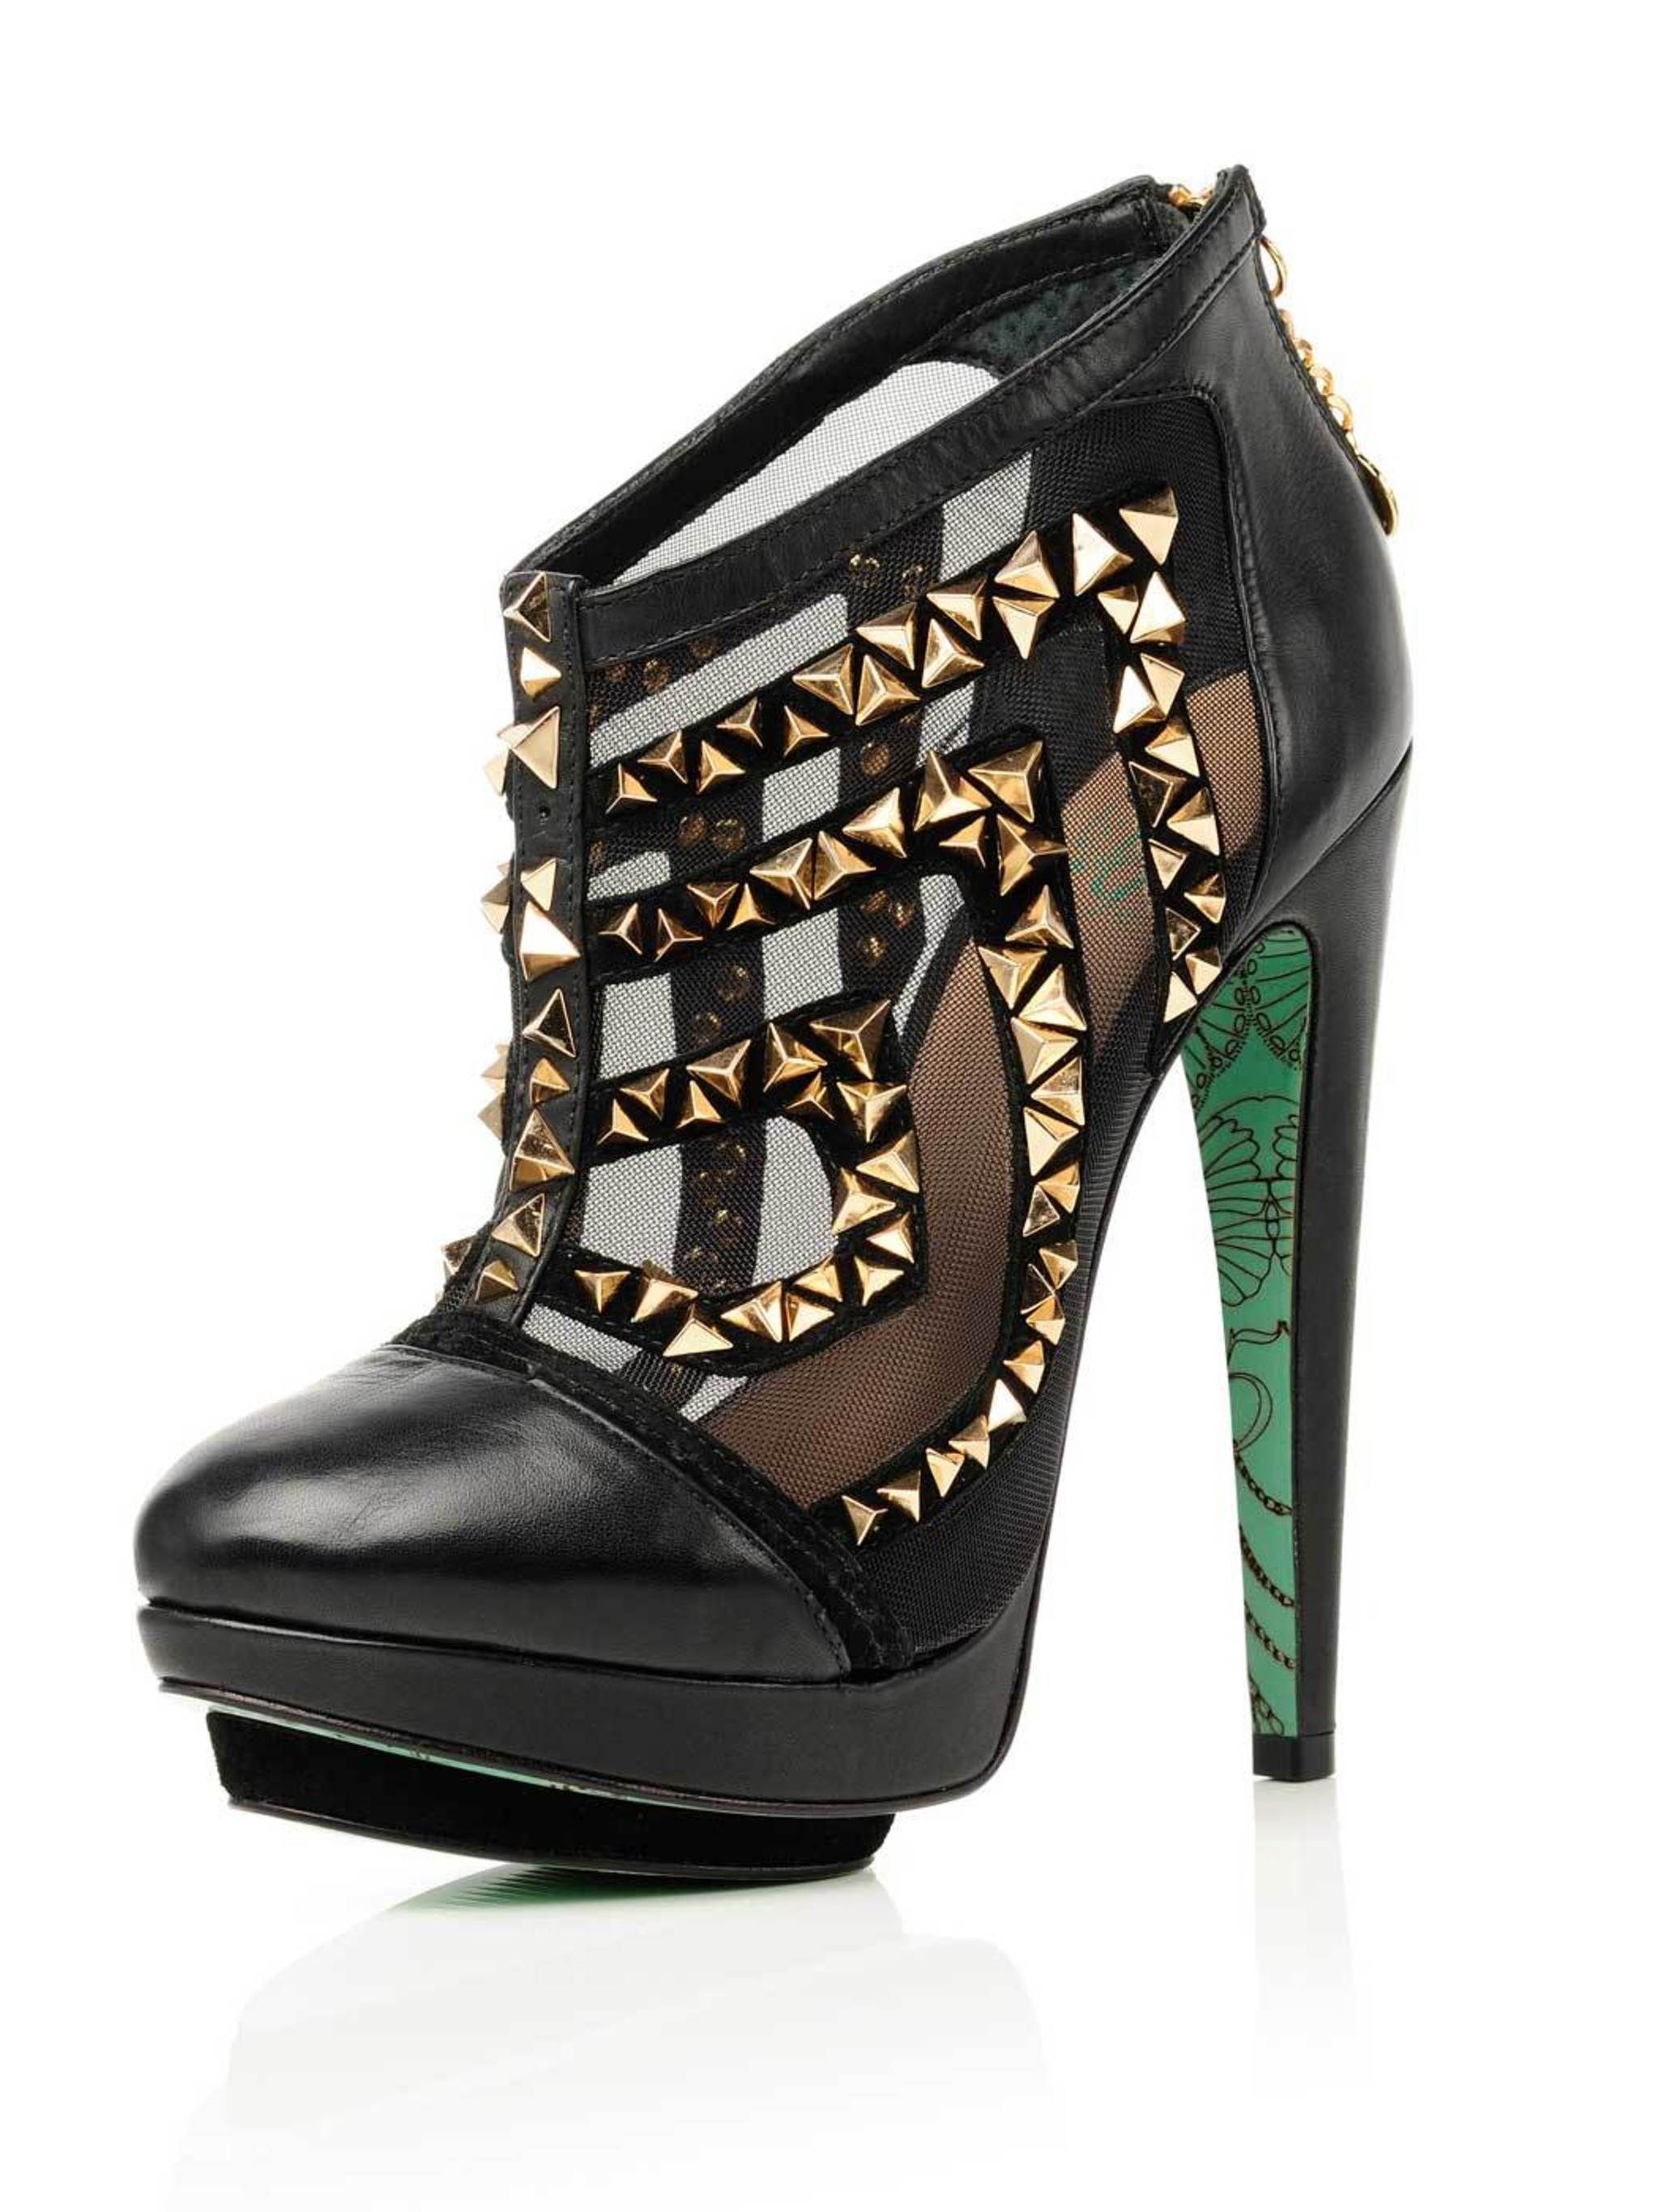 First look: Chloe Green shoes Autumn 